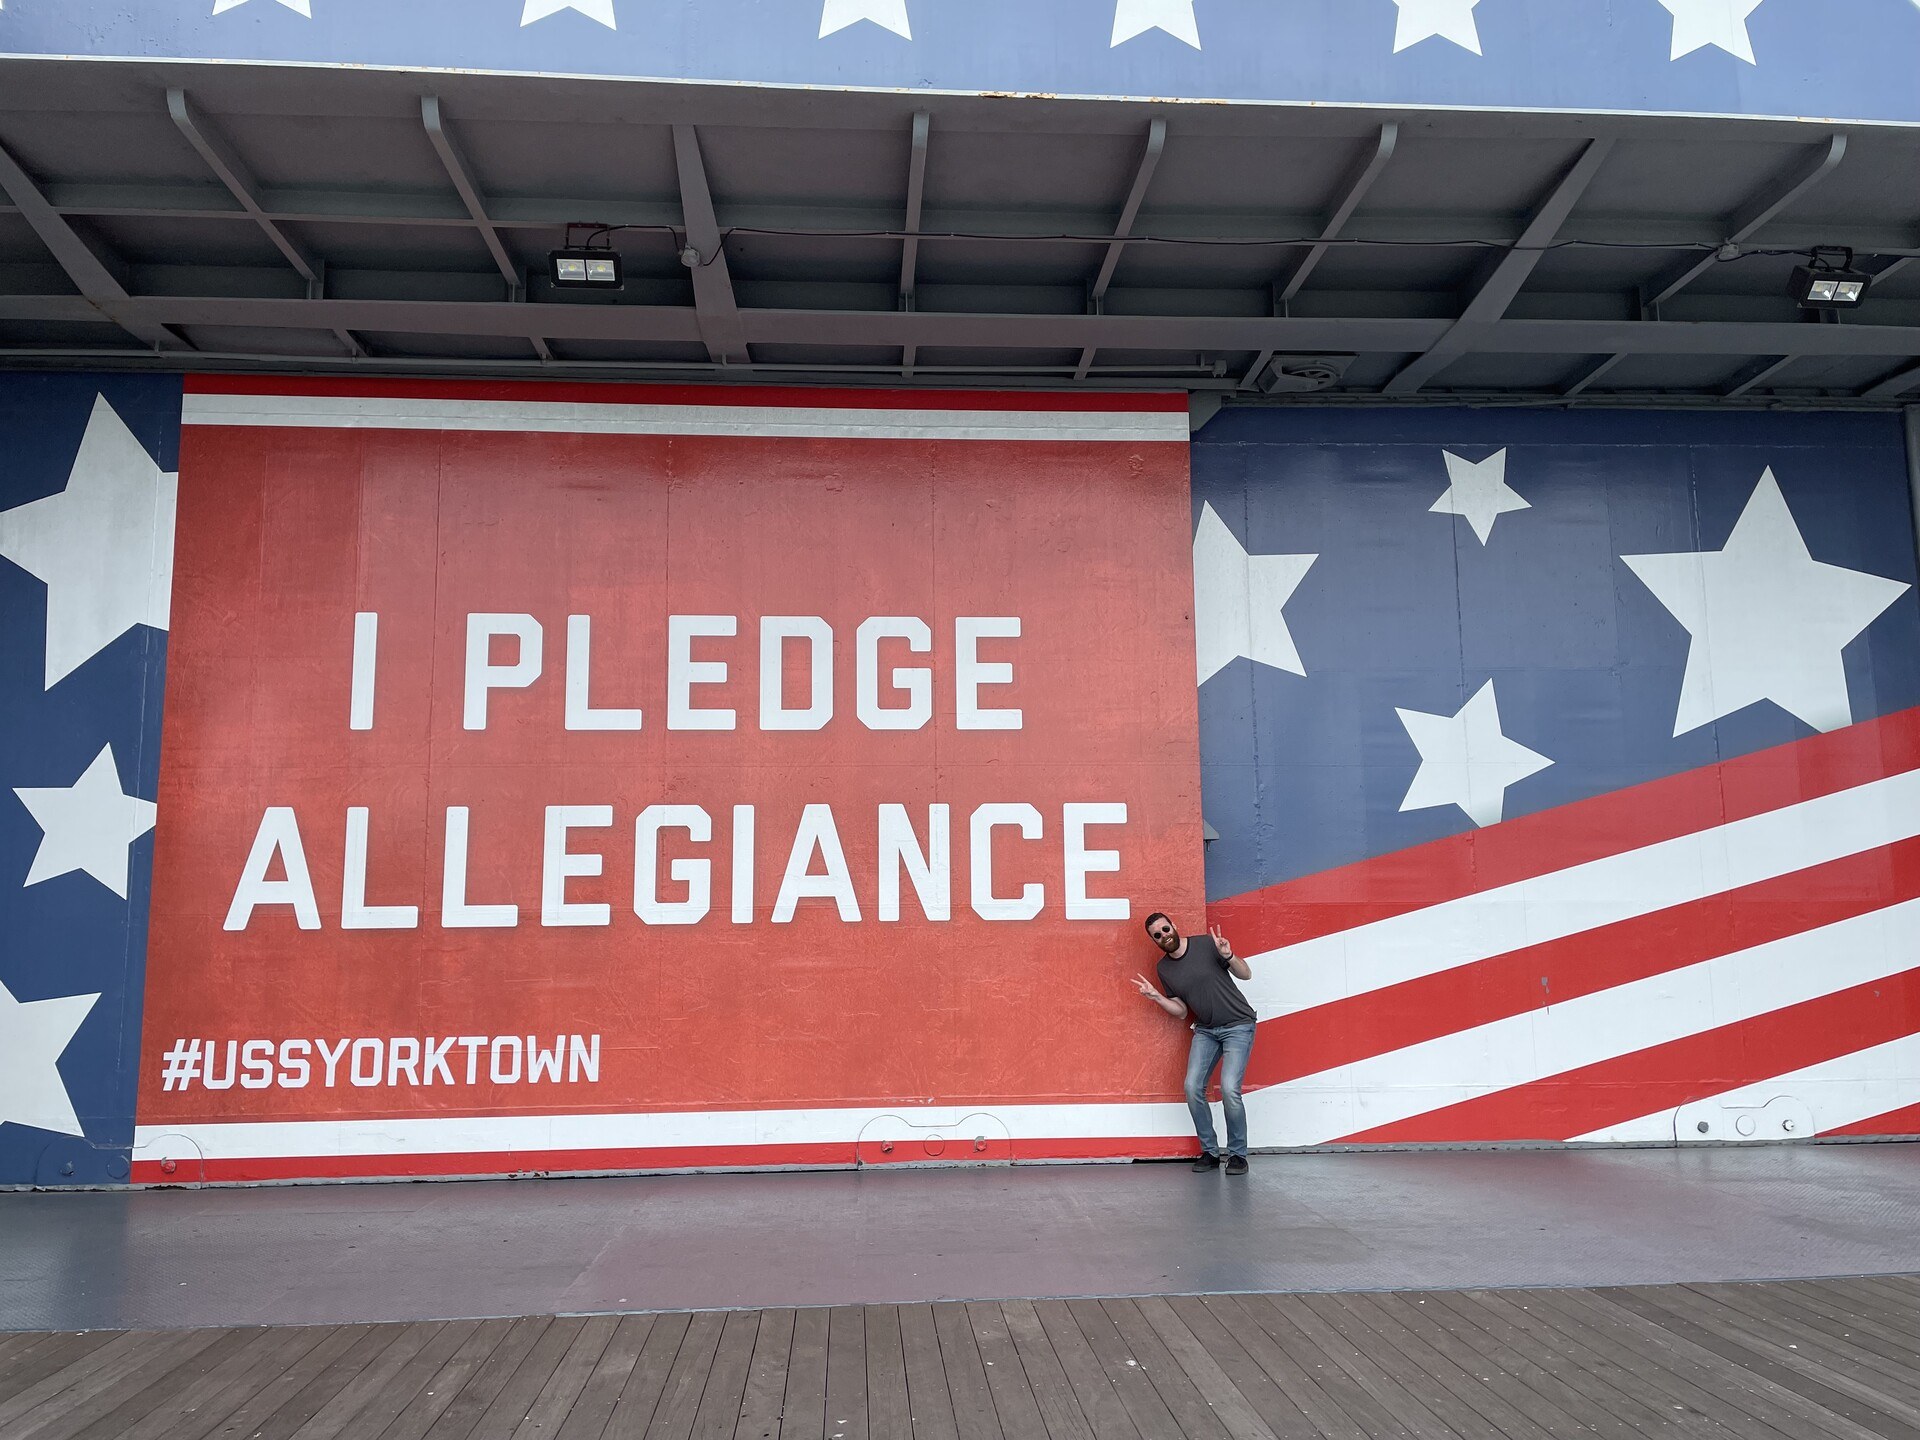 The author making a cutesy double-peace-sign gesture in front of a massive banner reading "I pledge allegiance" with requisite stars & stripes.